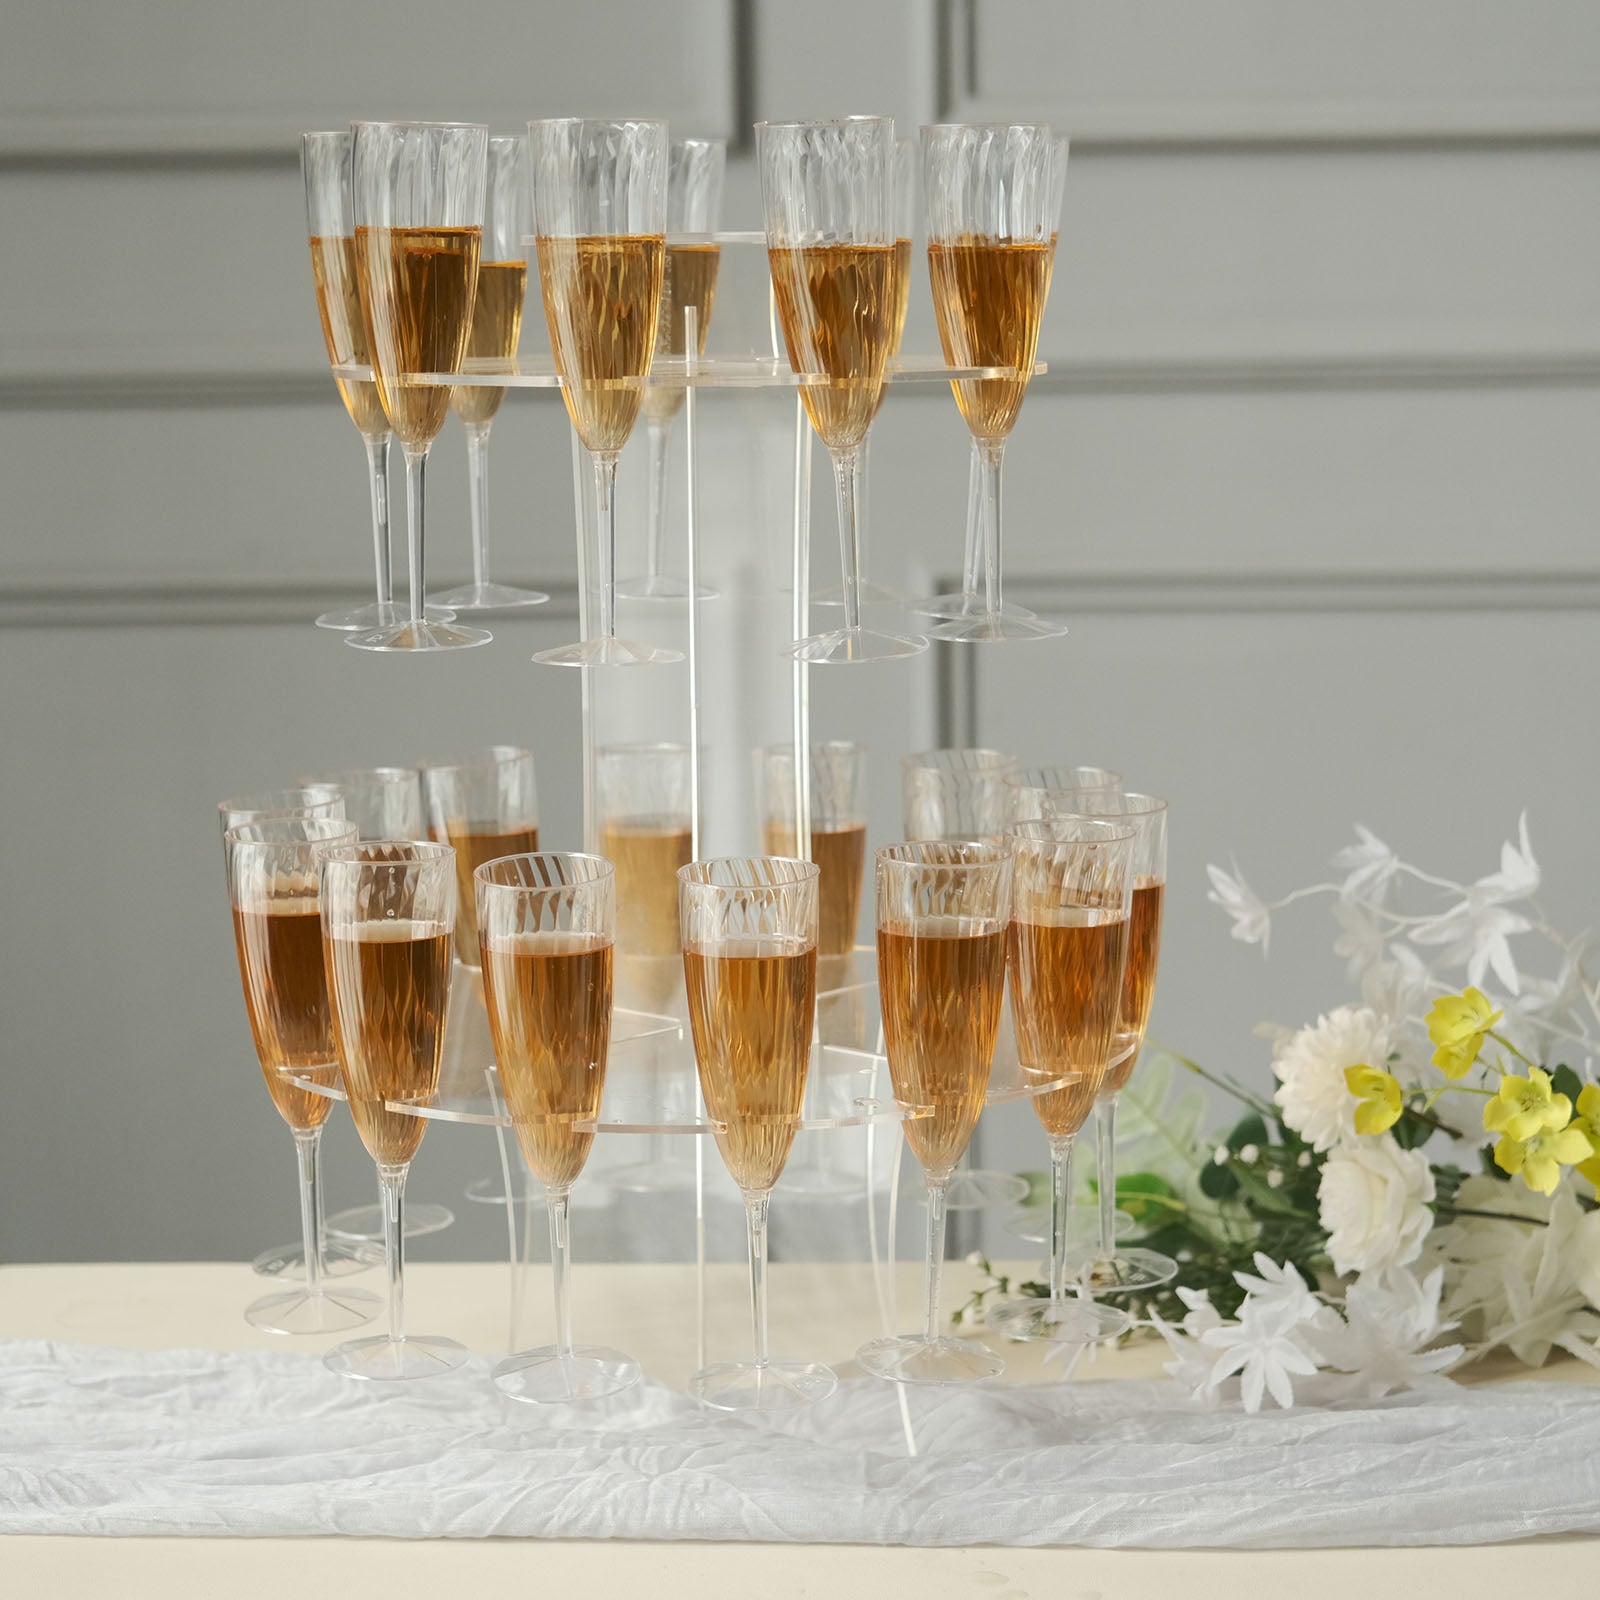 3-Tier Round Clear 21 Acrylic Champagne Glasses Flutes Display Stand, Wine Glass Rack Tower - Holds 23 Stemware + 1 Bottle